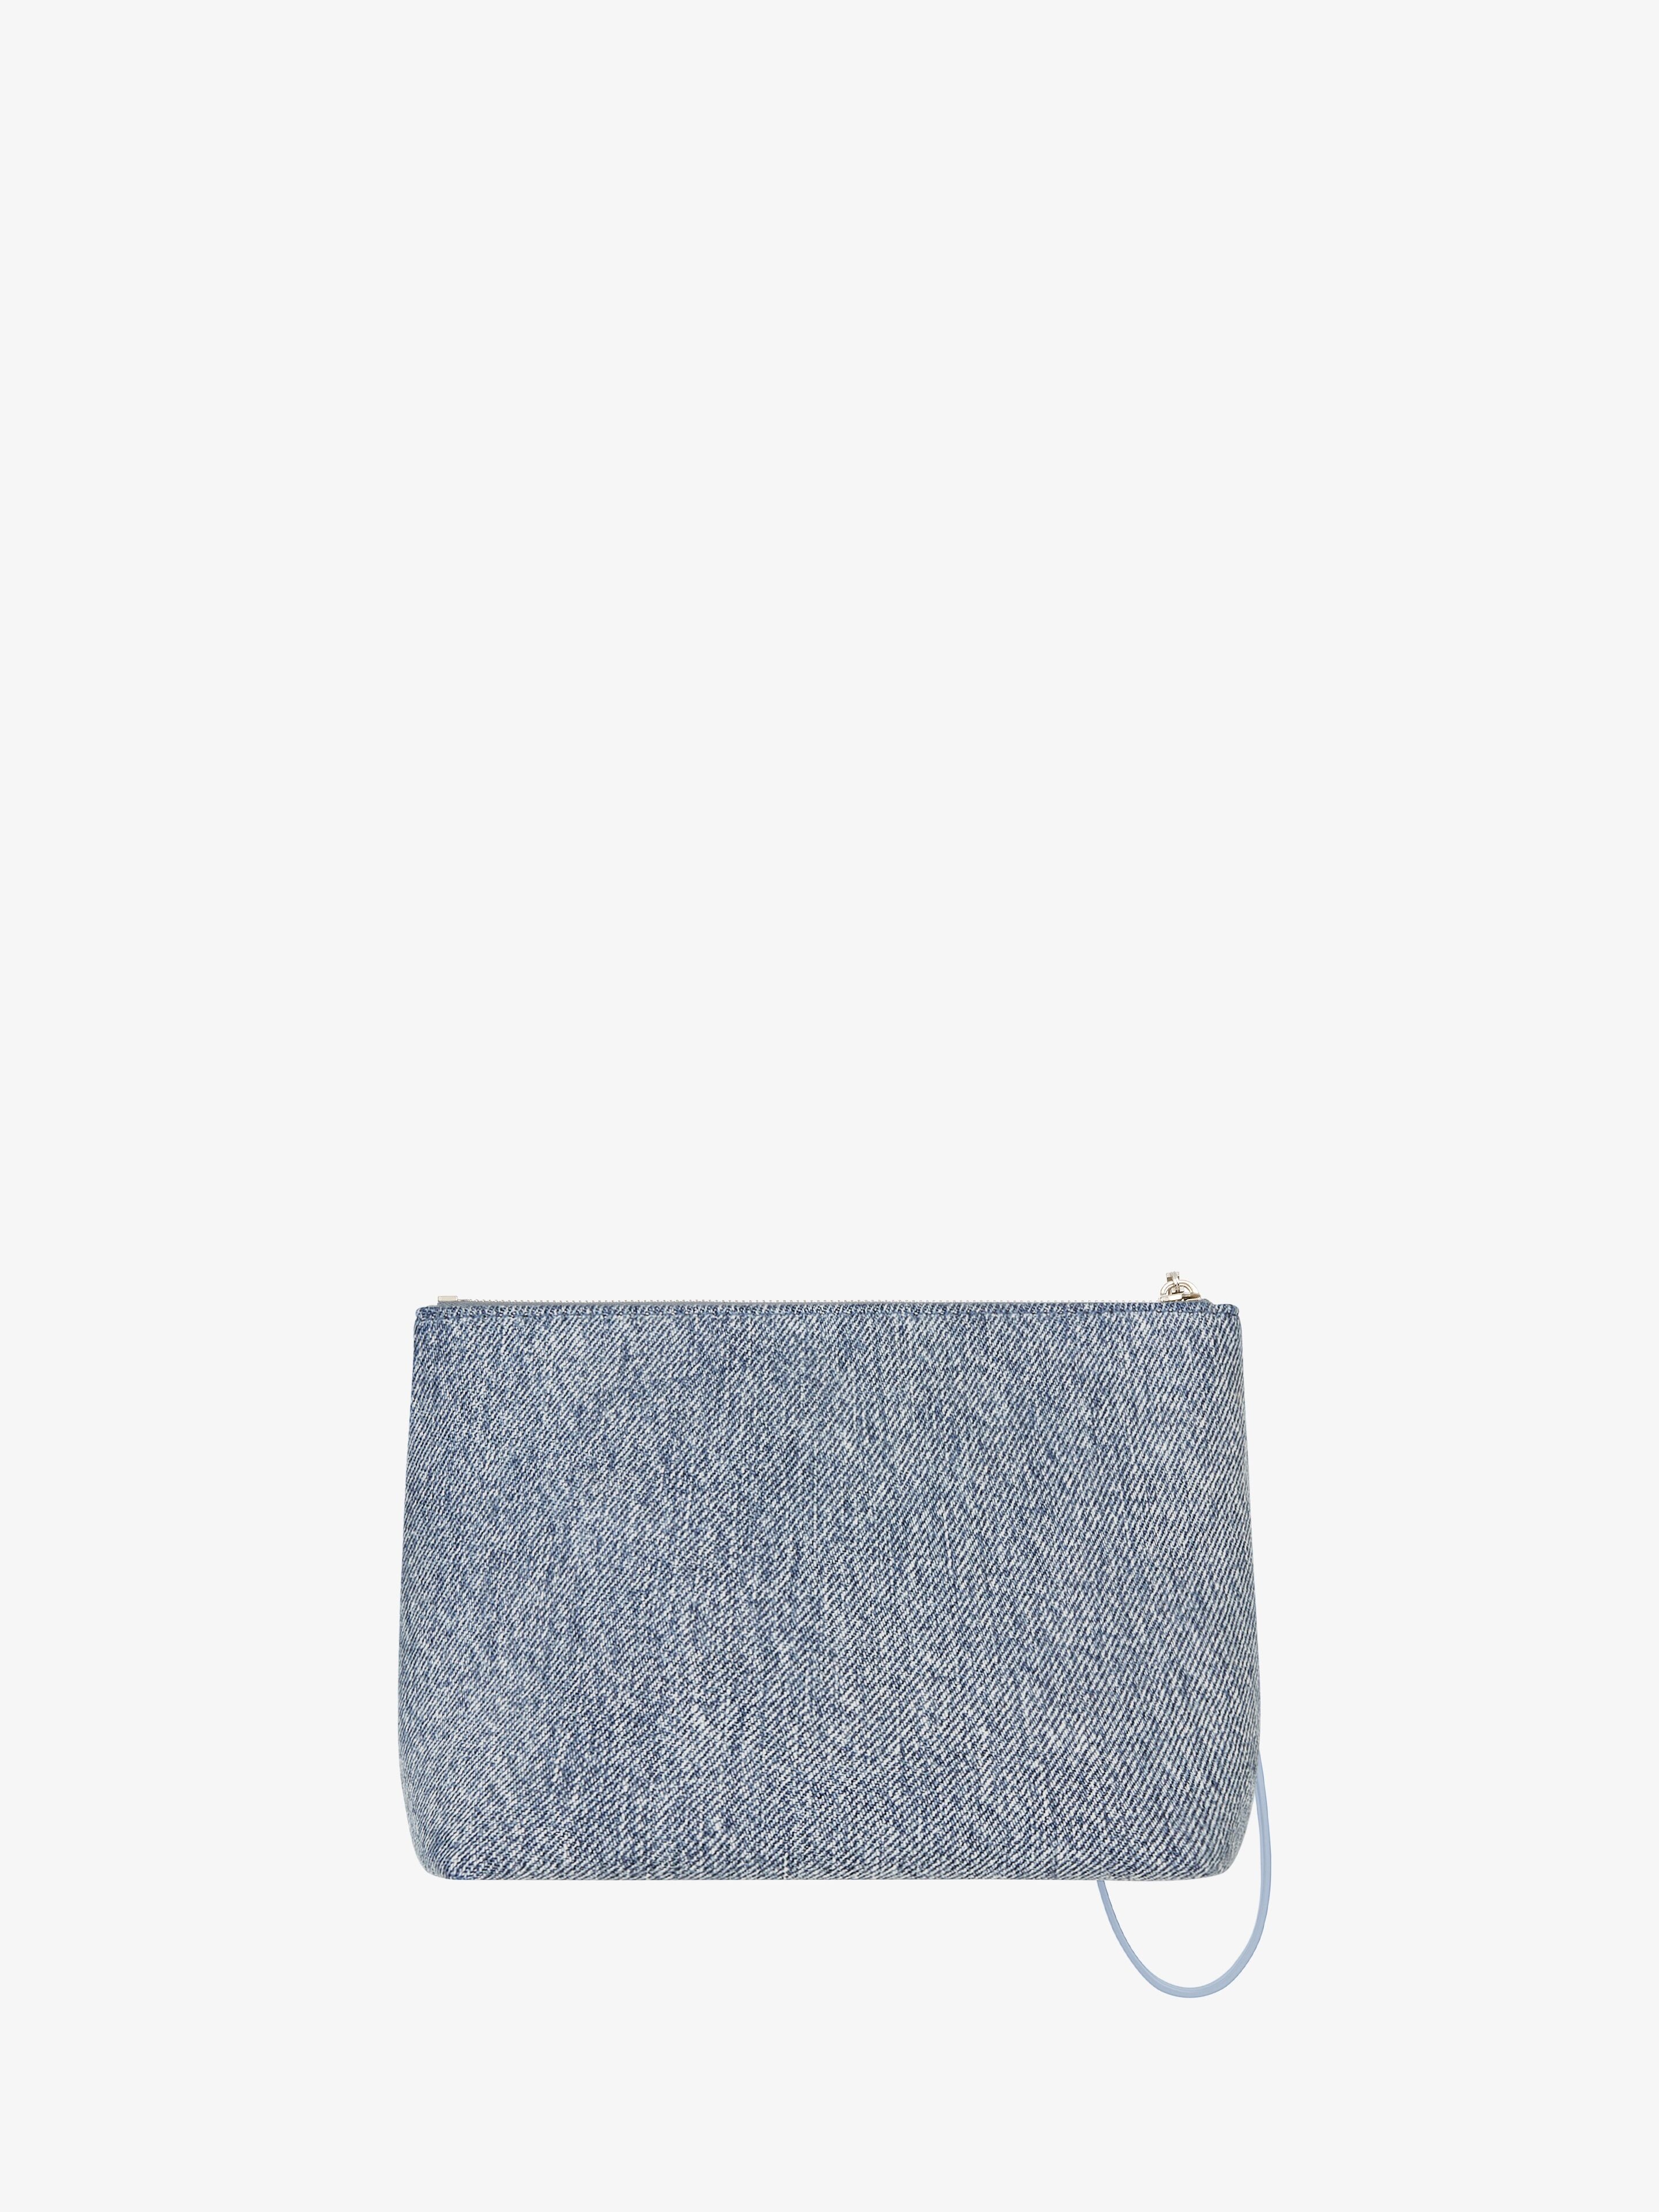 GIVENCHY TRAVEL POUCH IN DENIM - 3